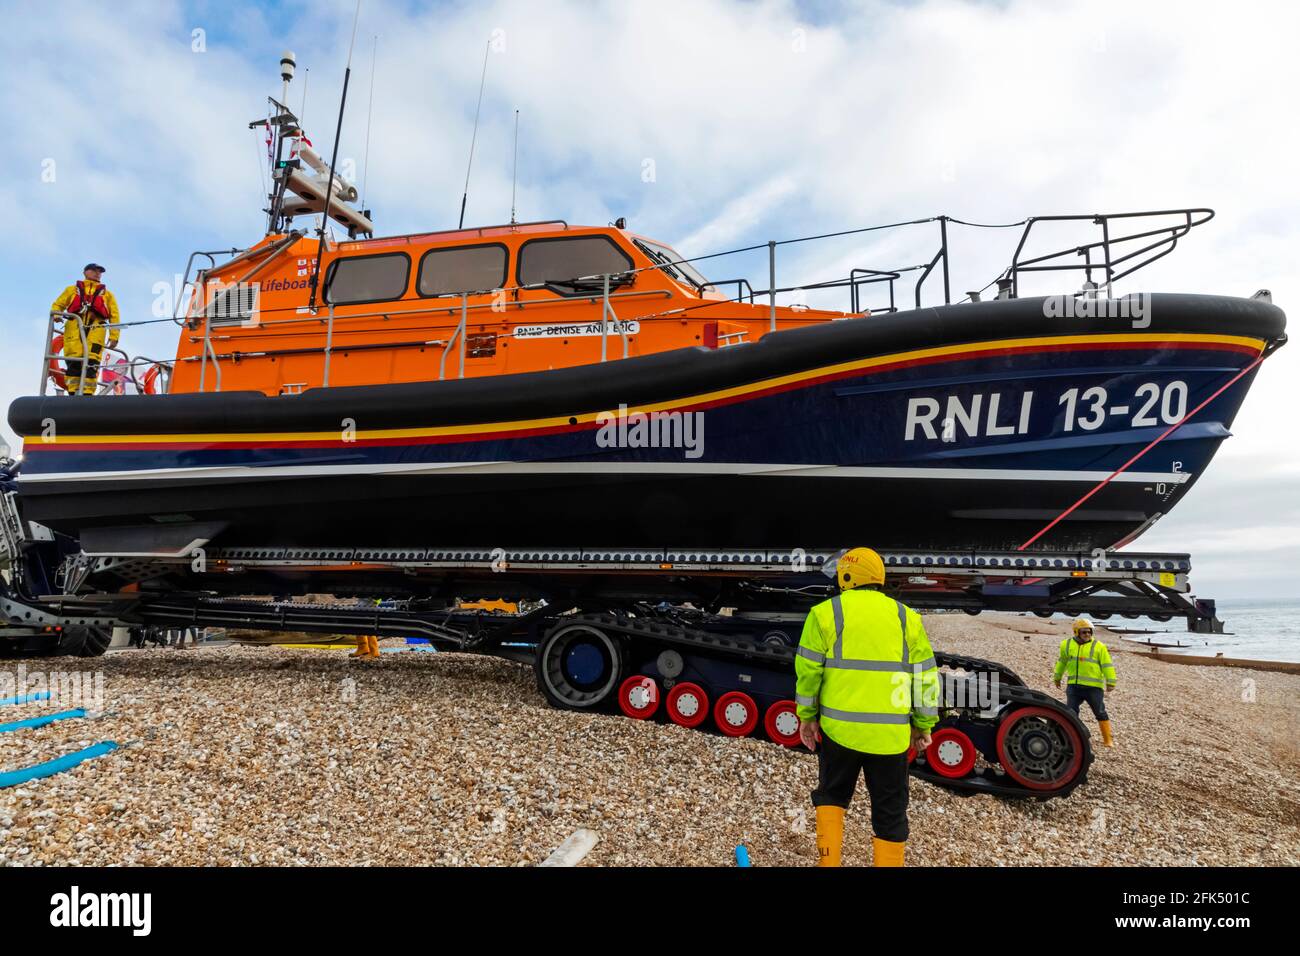 England, West Sussex, Chichester, Selsey Bill, The RNLI Selsey Bill Lifeboat *** Local Caption *** UK,United Kingdom,Great Britain,Britain,England,Br Stockfoto